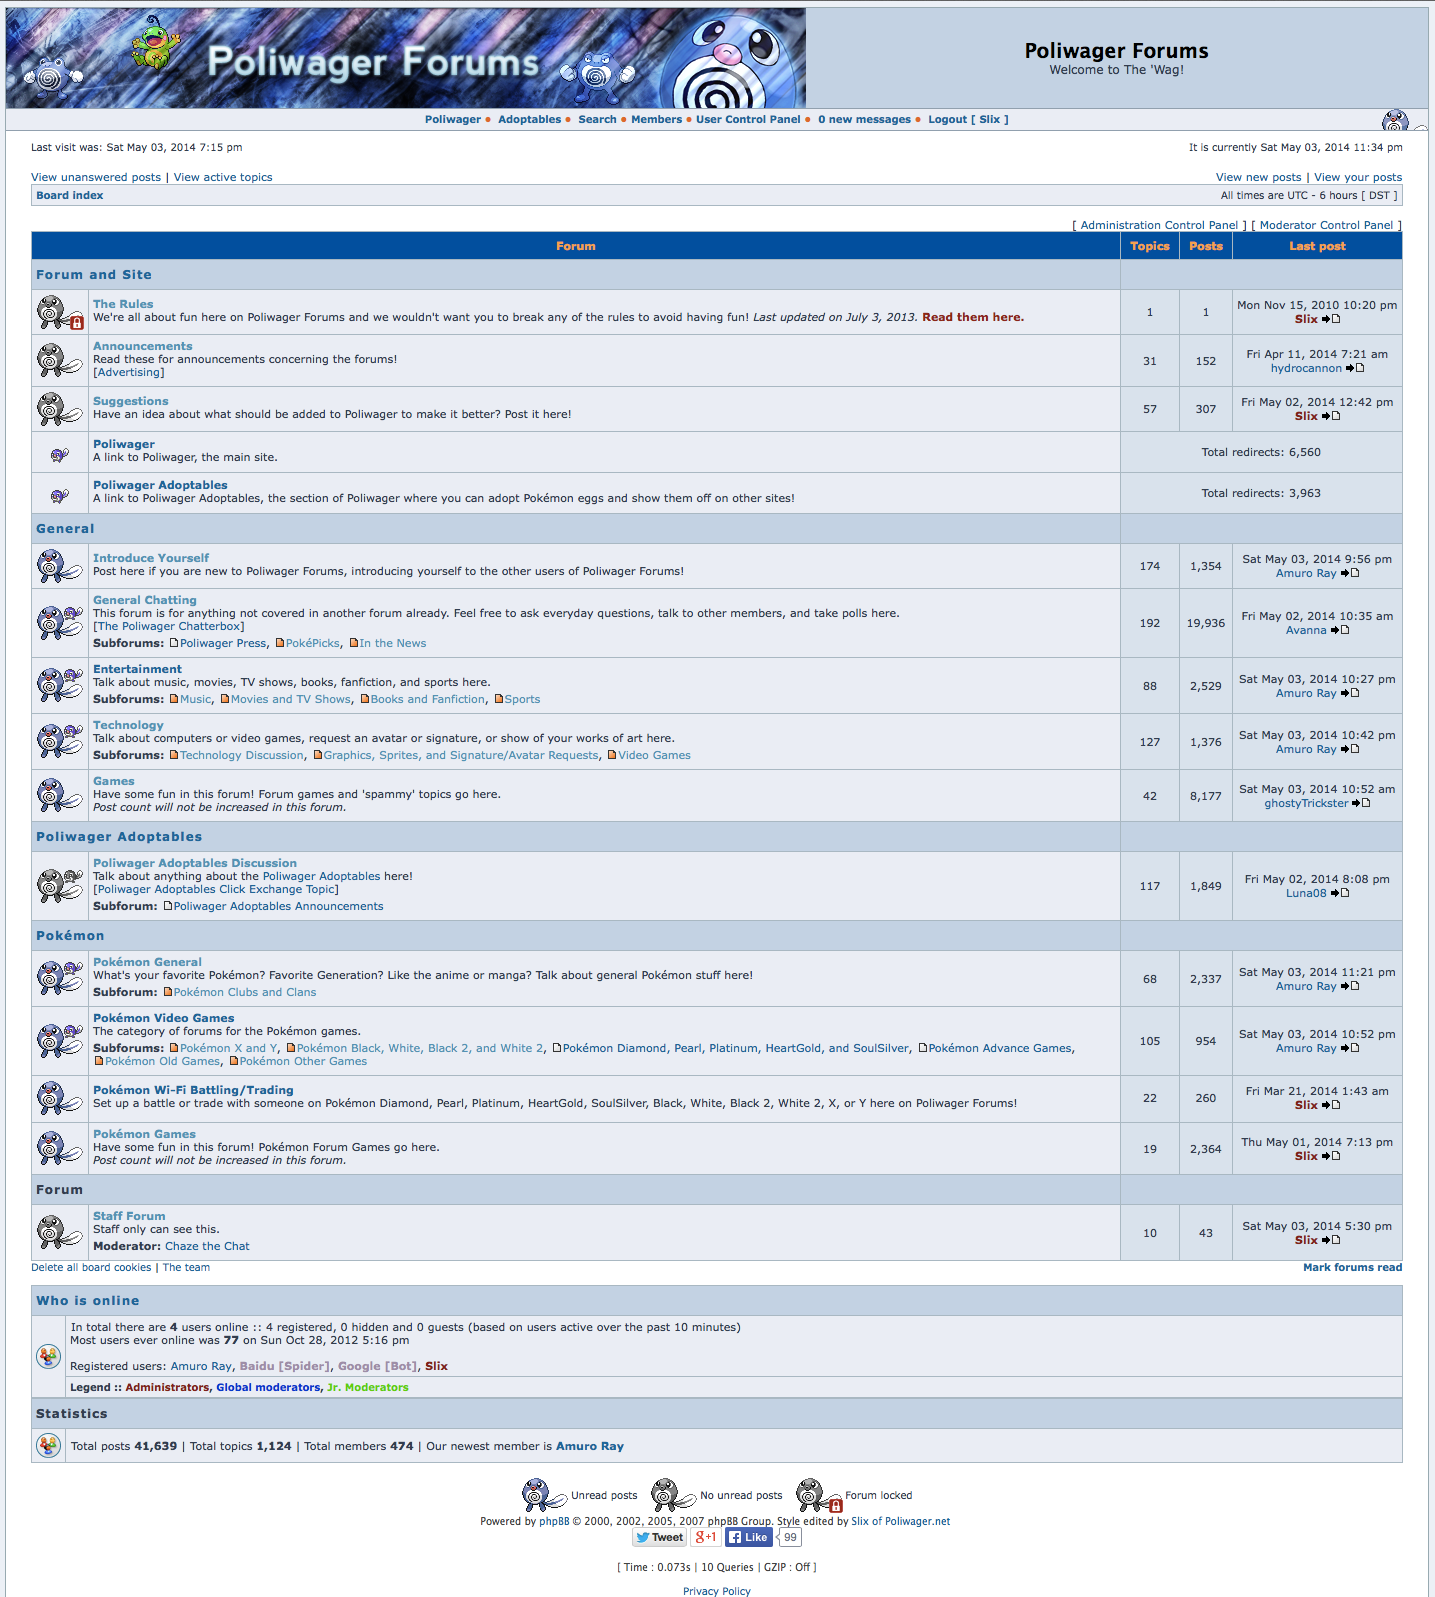 The Poliwager forums from May 2014